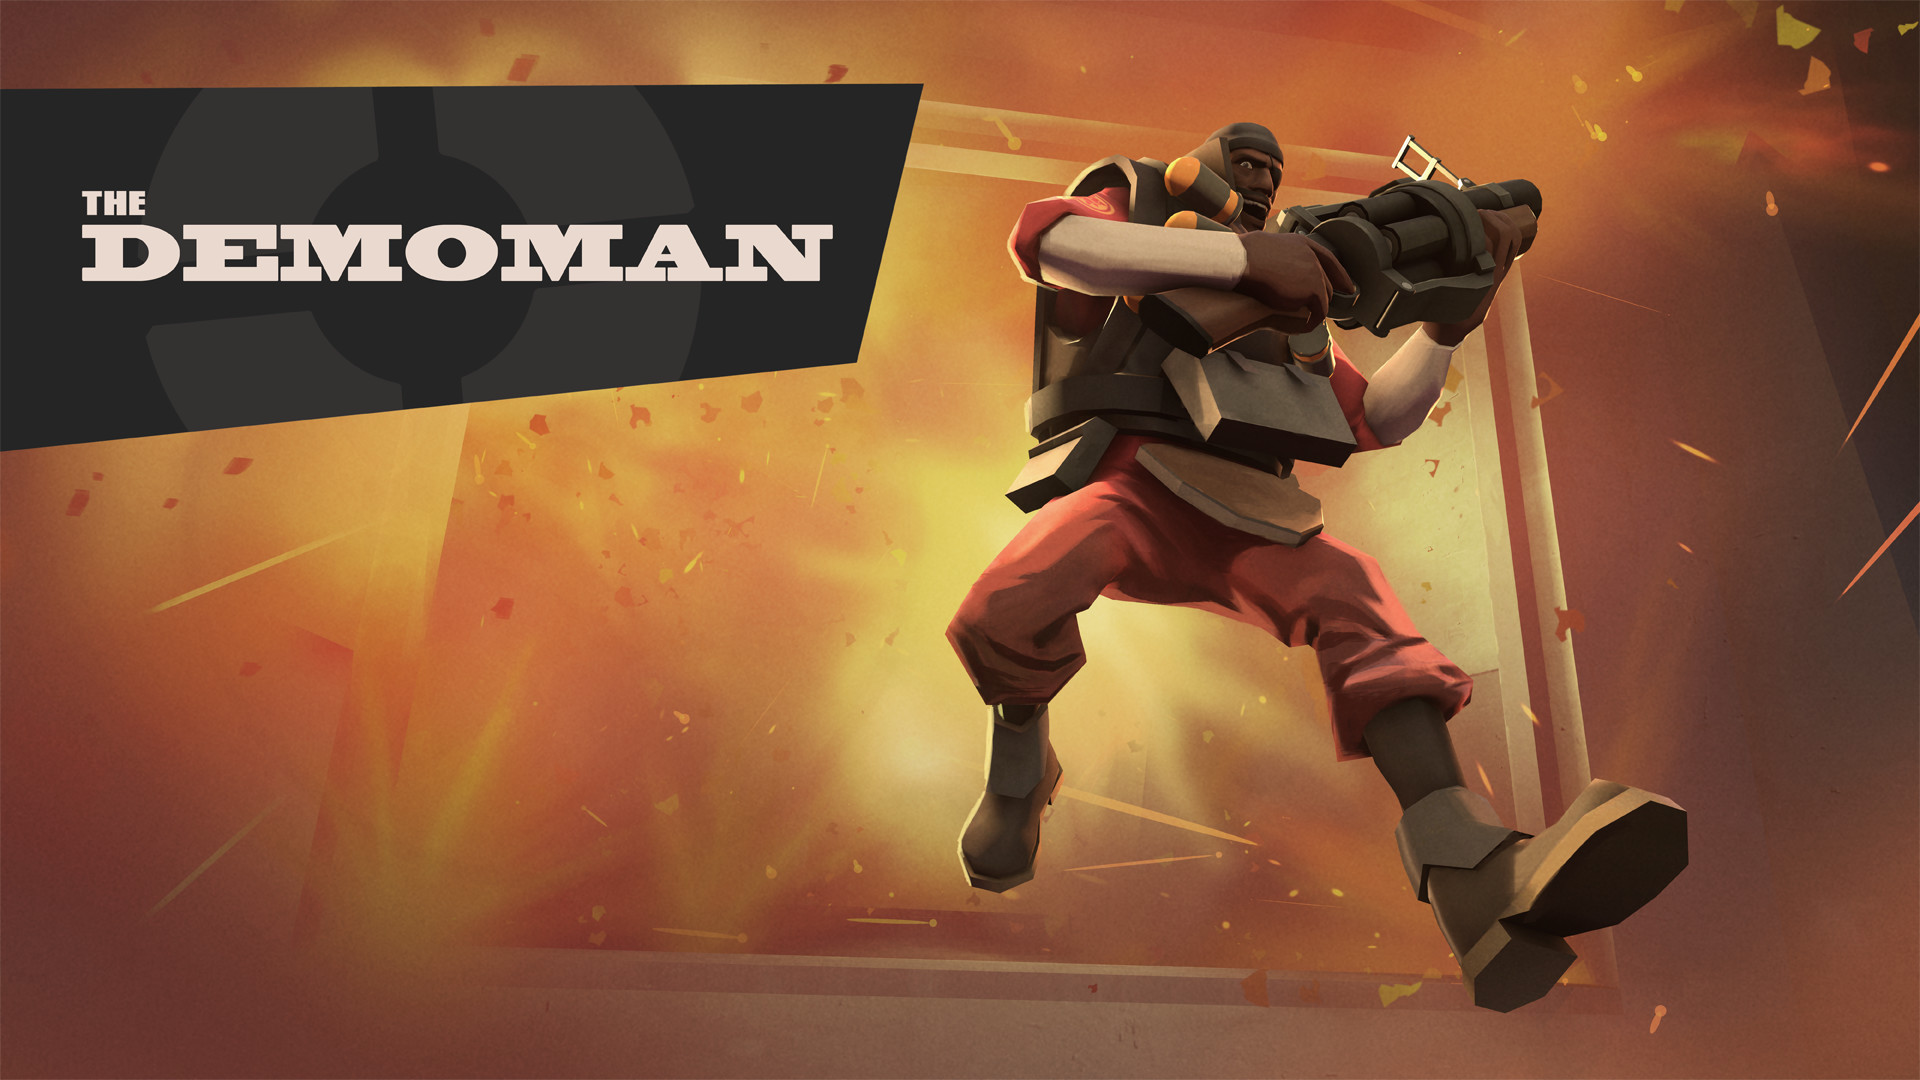 1920x1080 new tf2 wallpapers/backgrounds - Steam Users' Forums